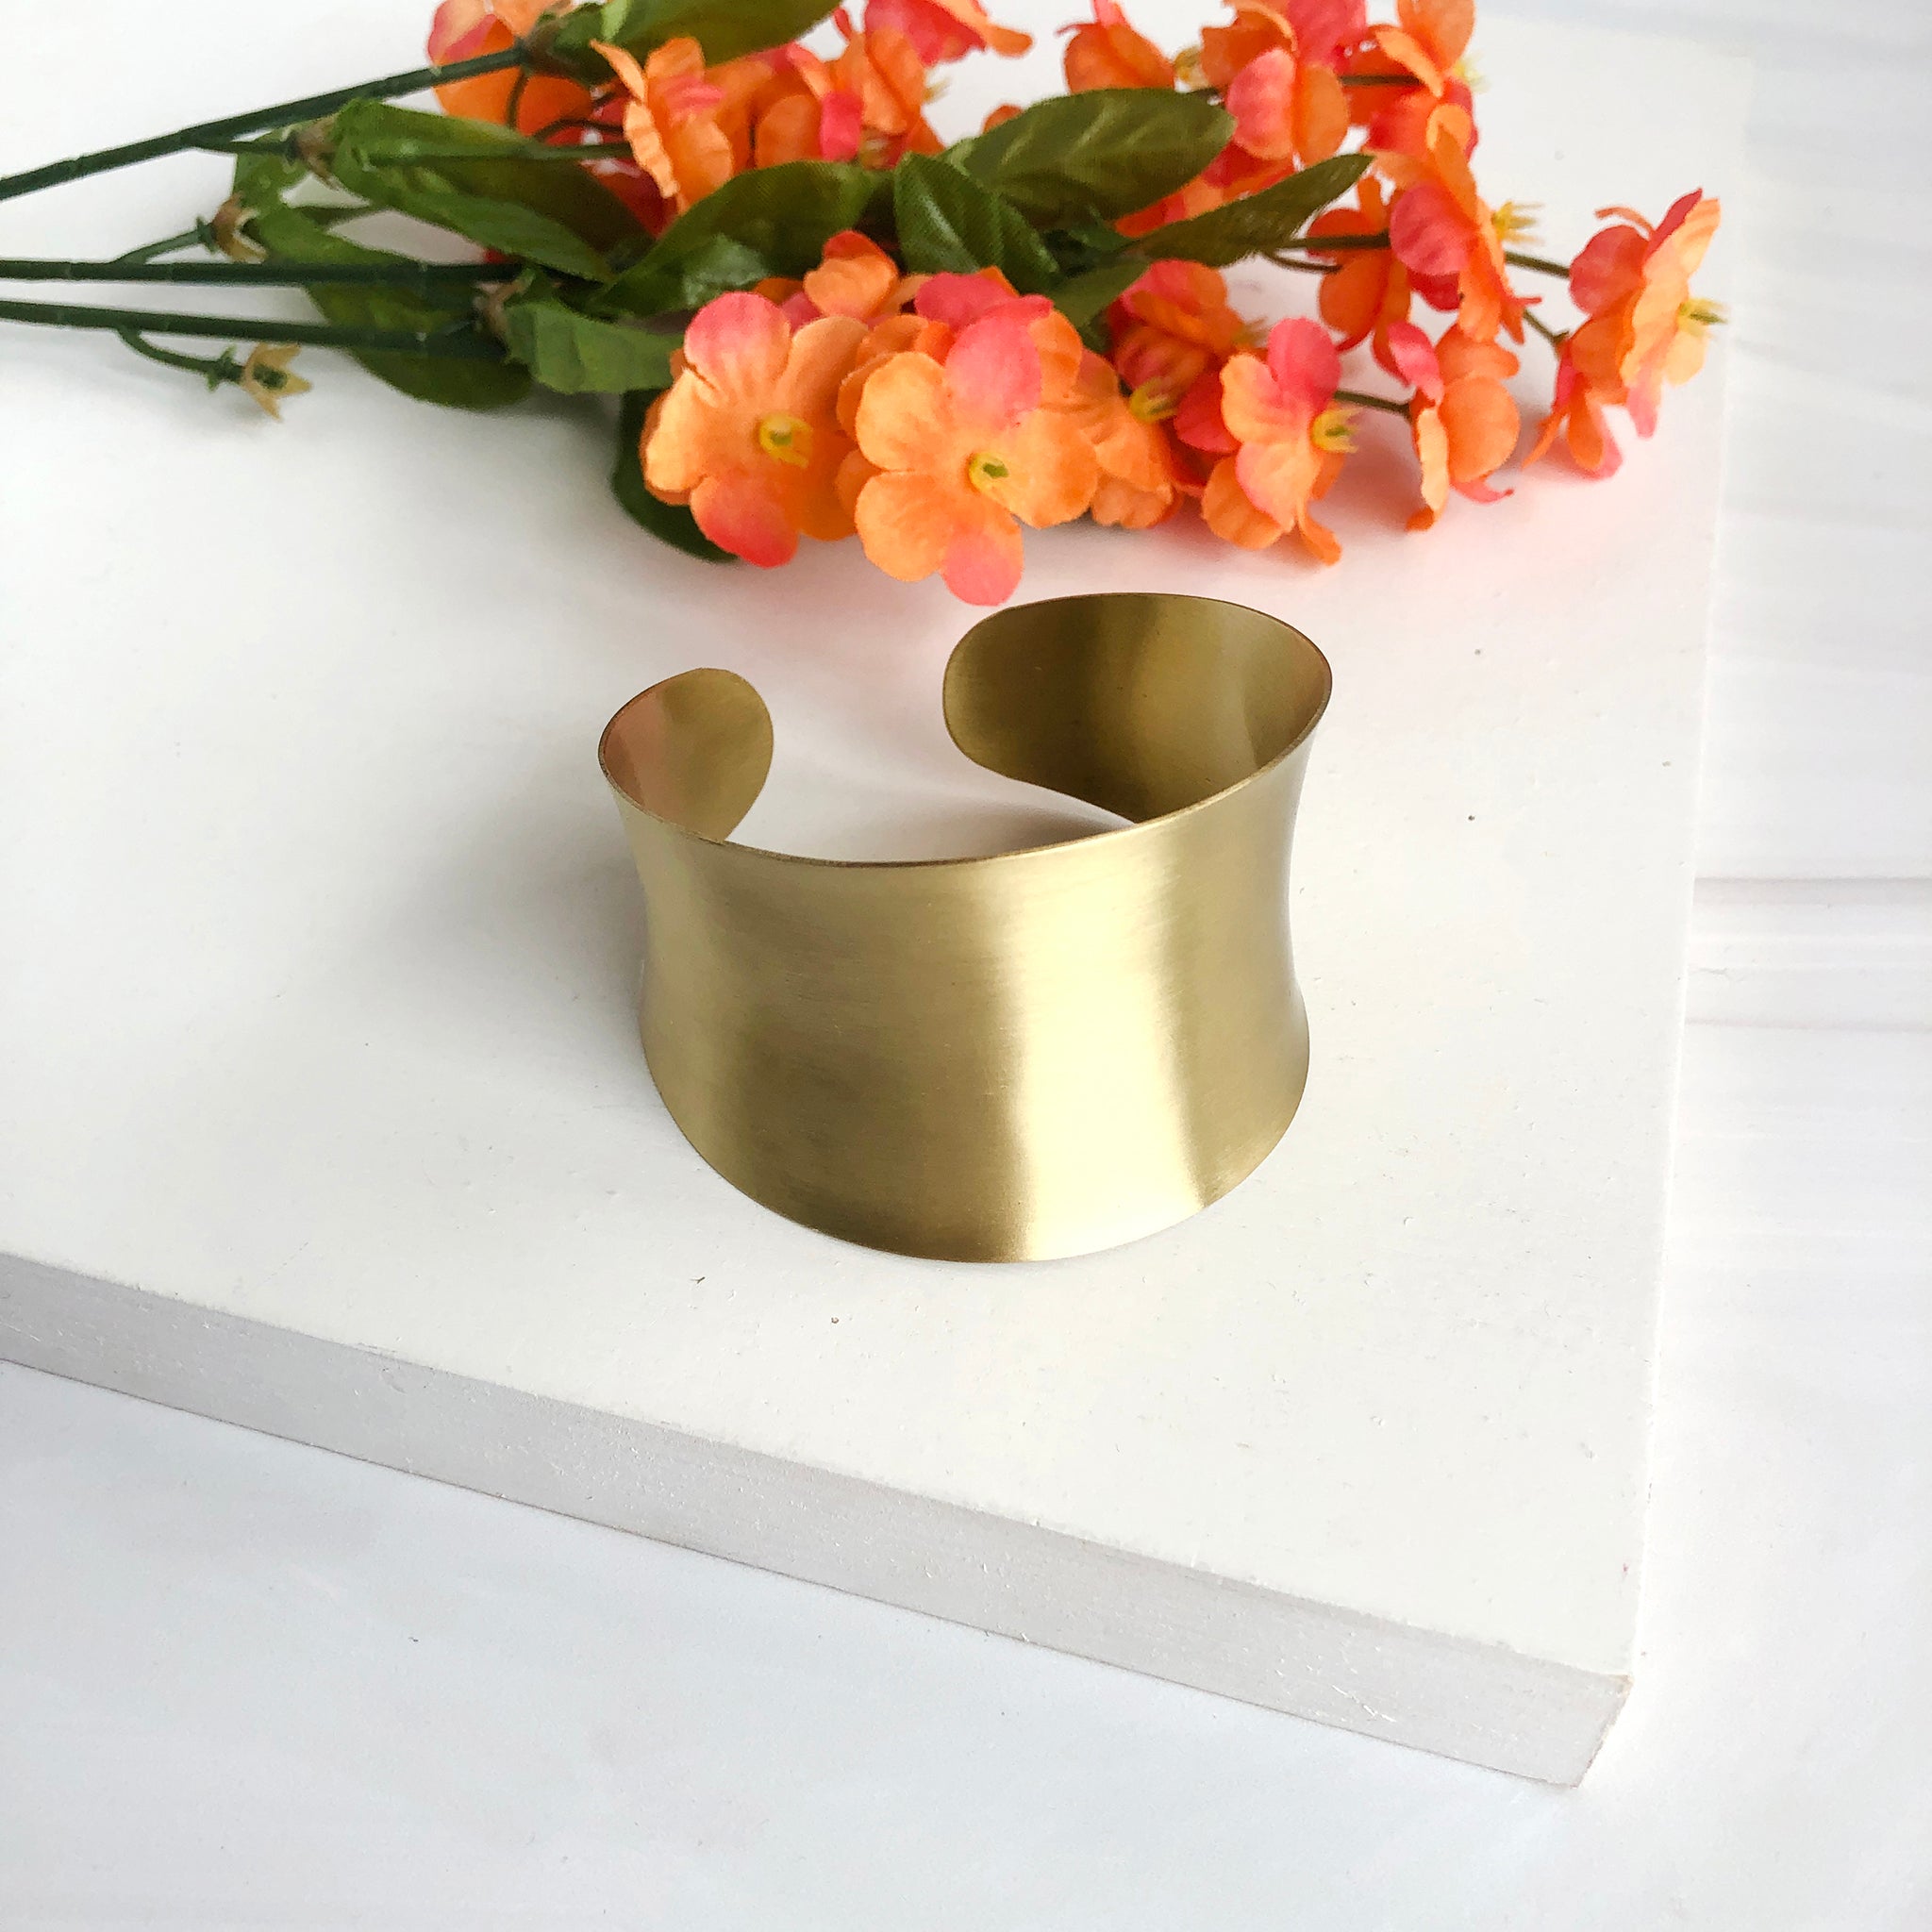 A tall gold cuff bracelet is seen with some orange flowers.